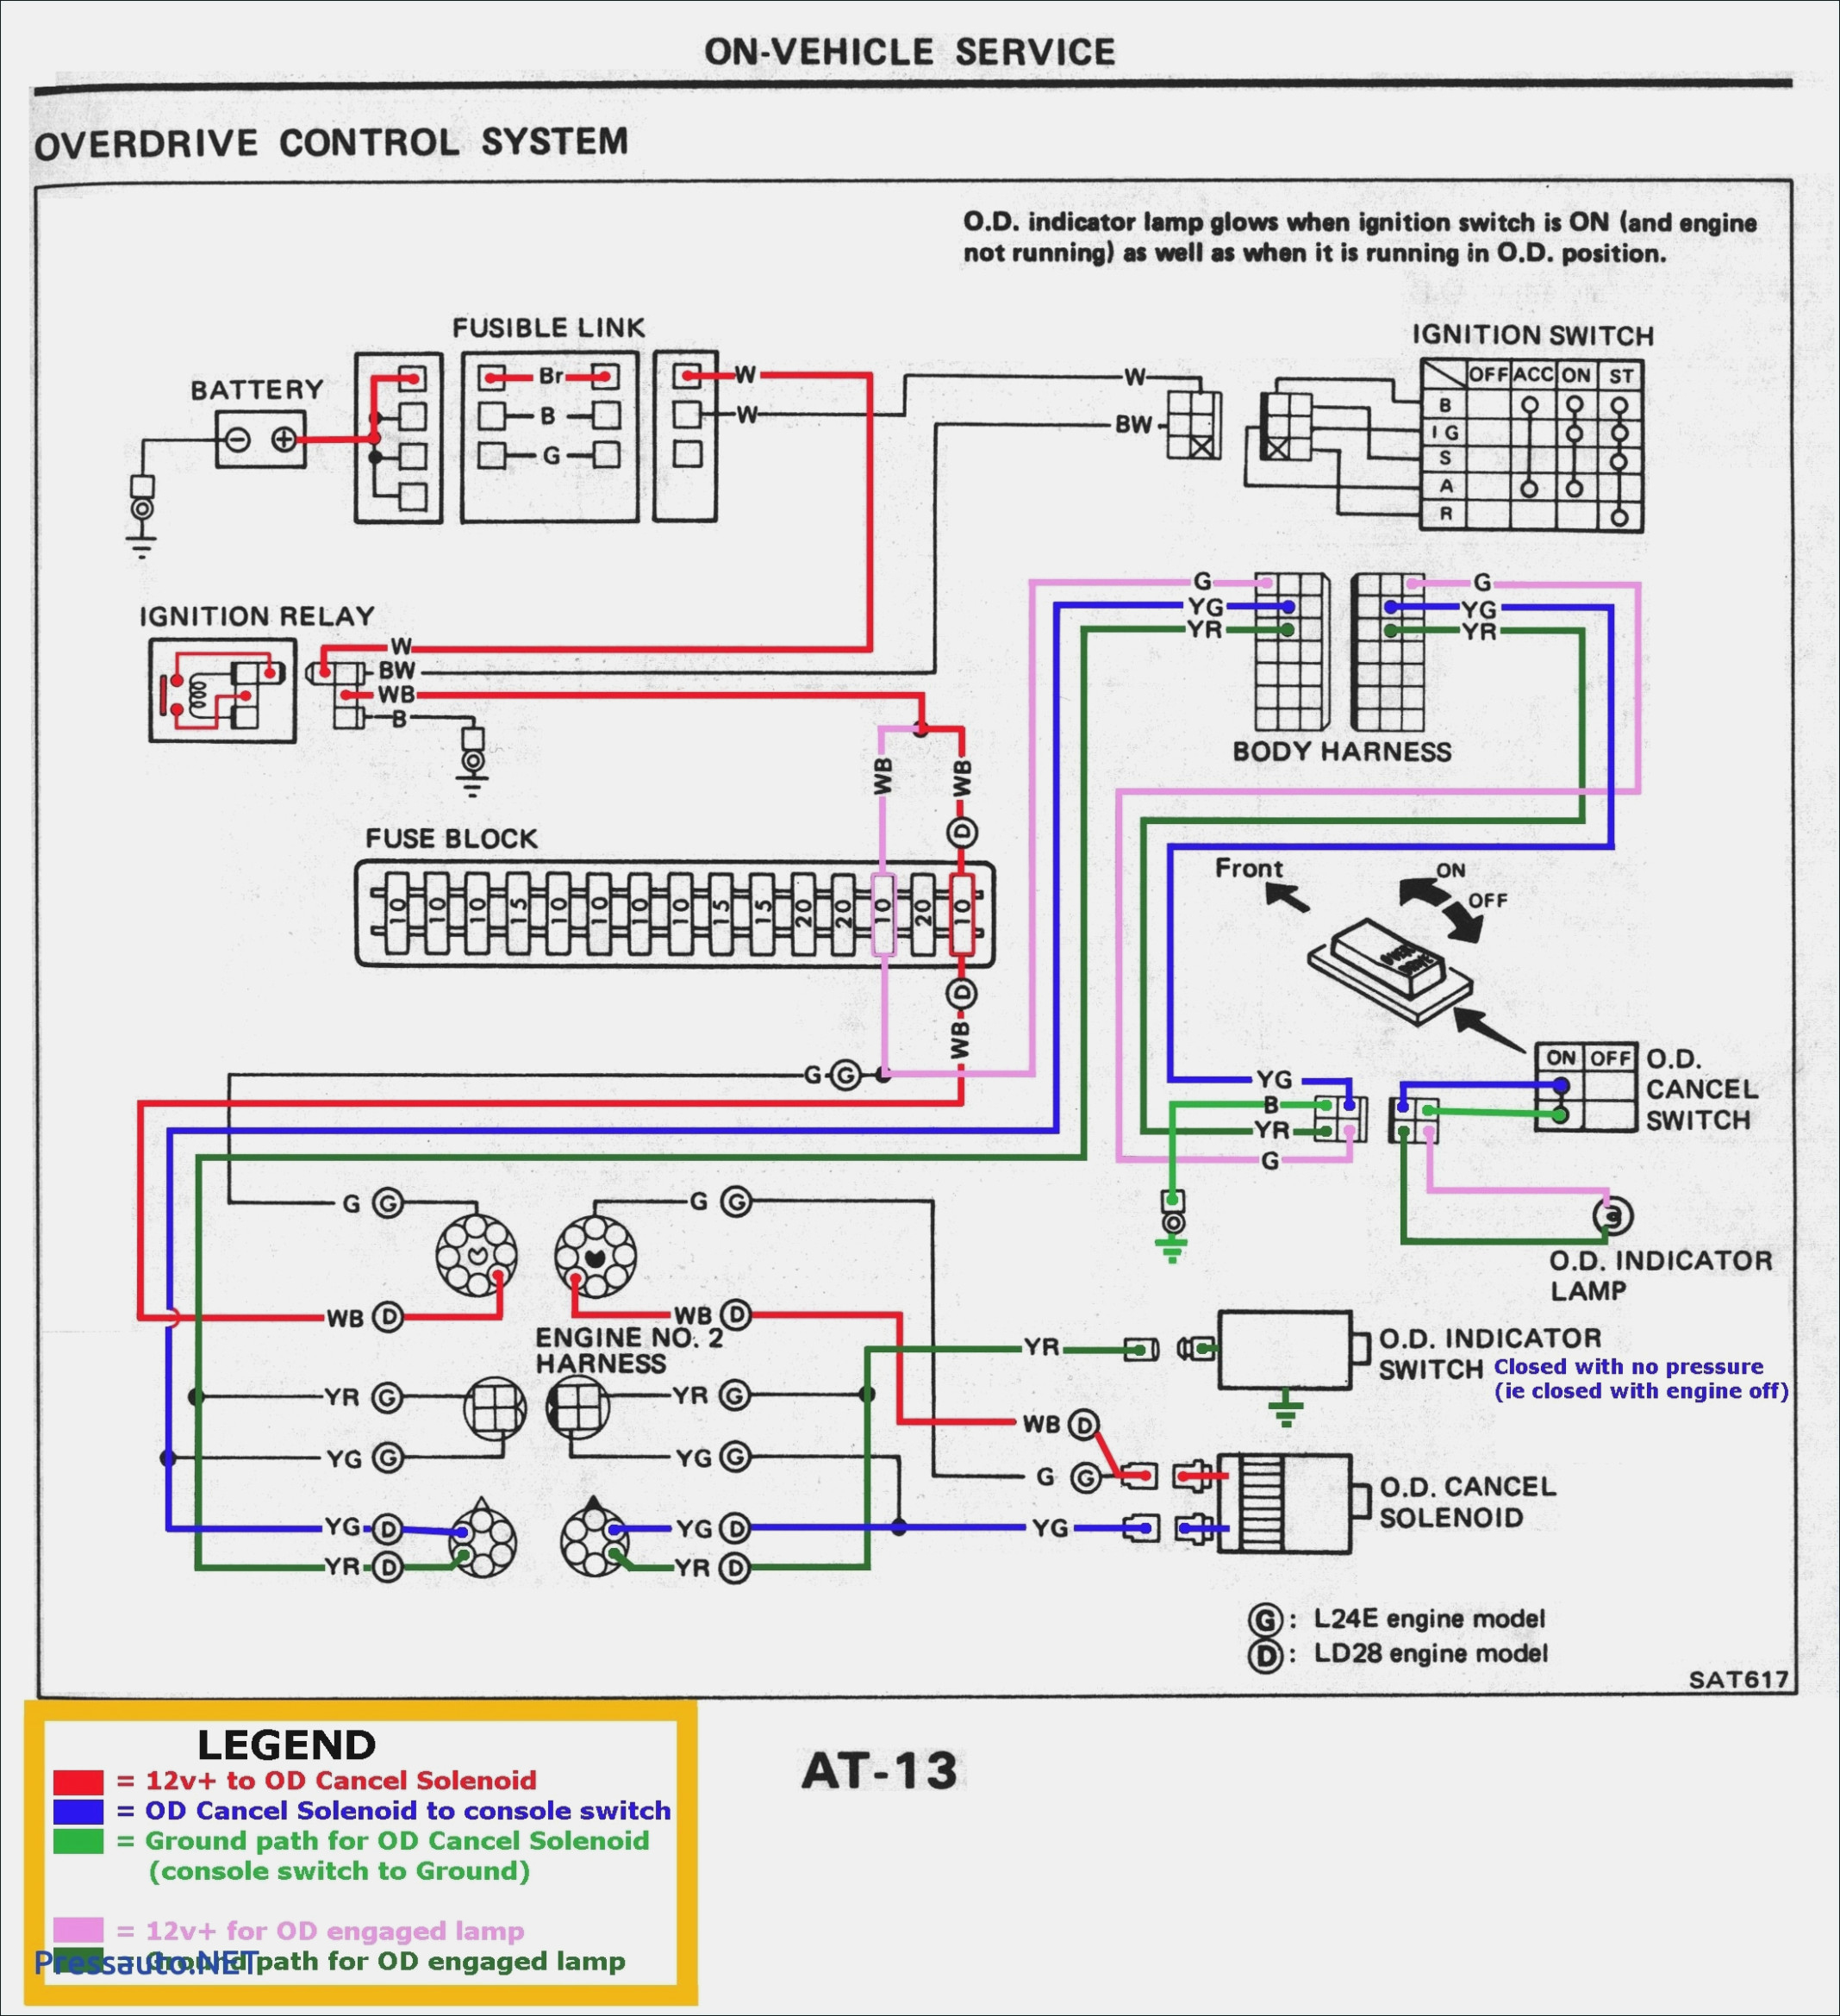 Off Road Led Light Wiring Diagram | Wiring Library - Cree Led Light Bar Wiring Diagram Pdf